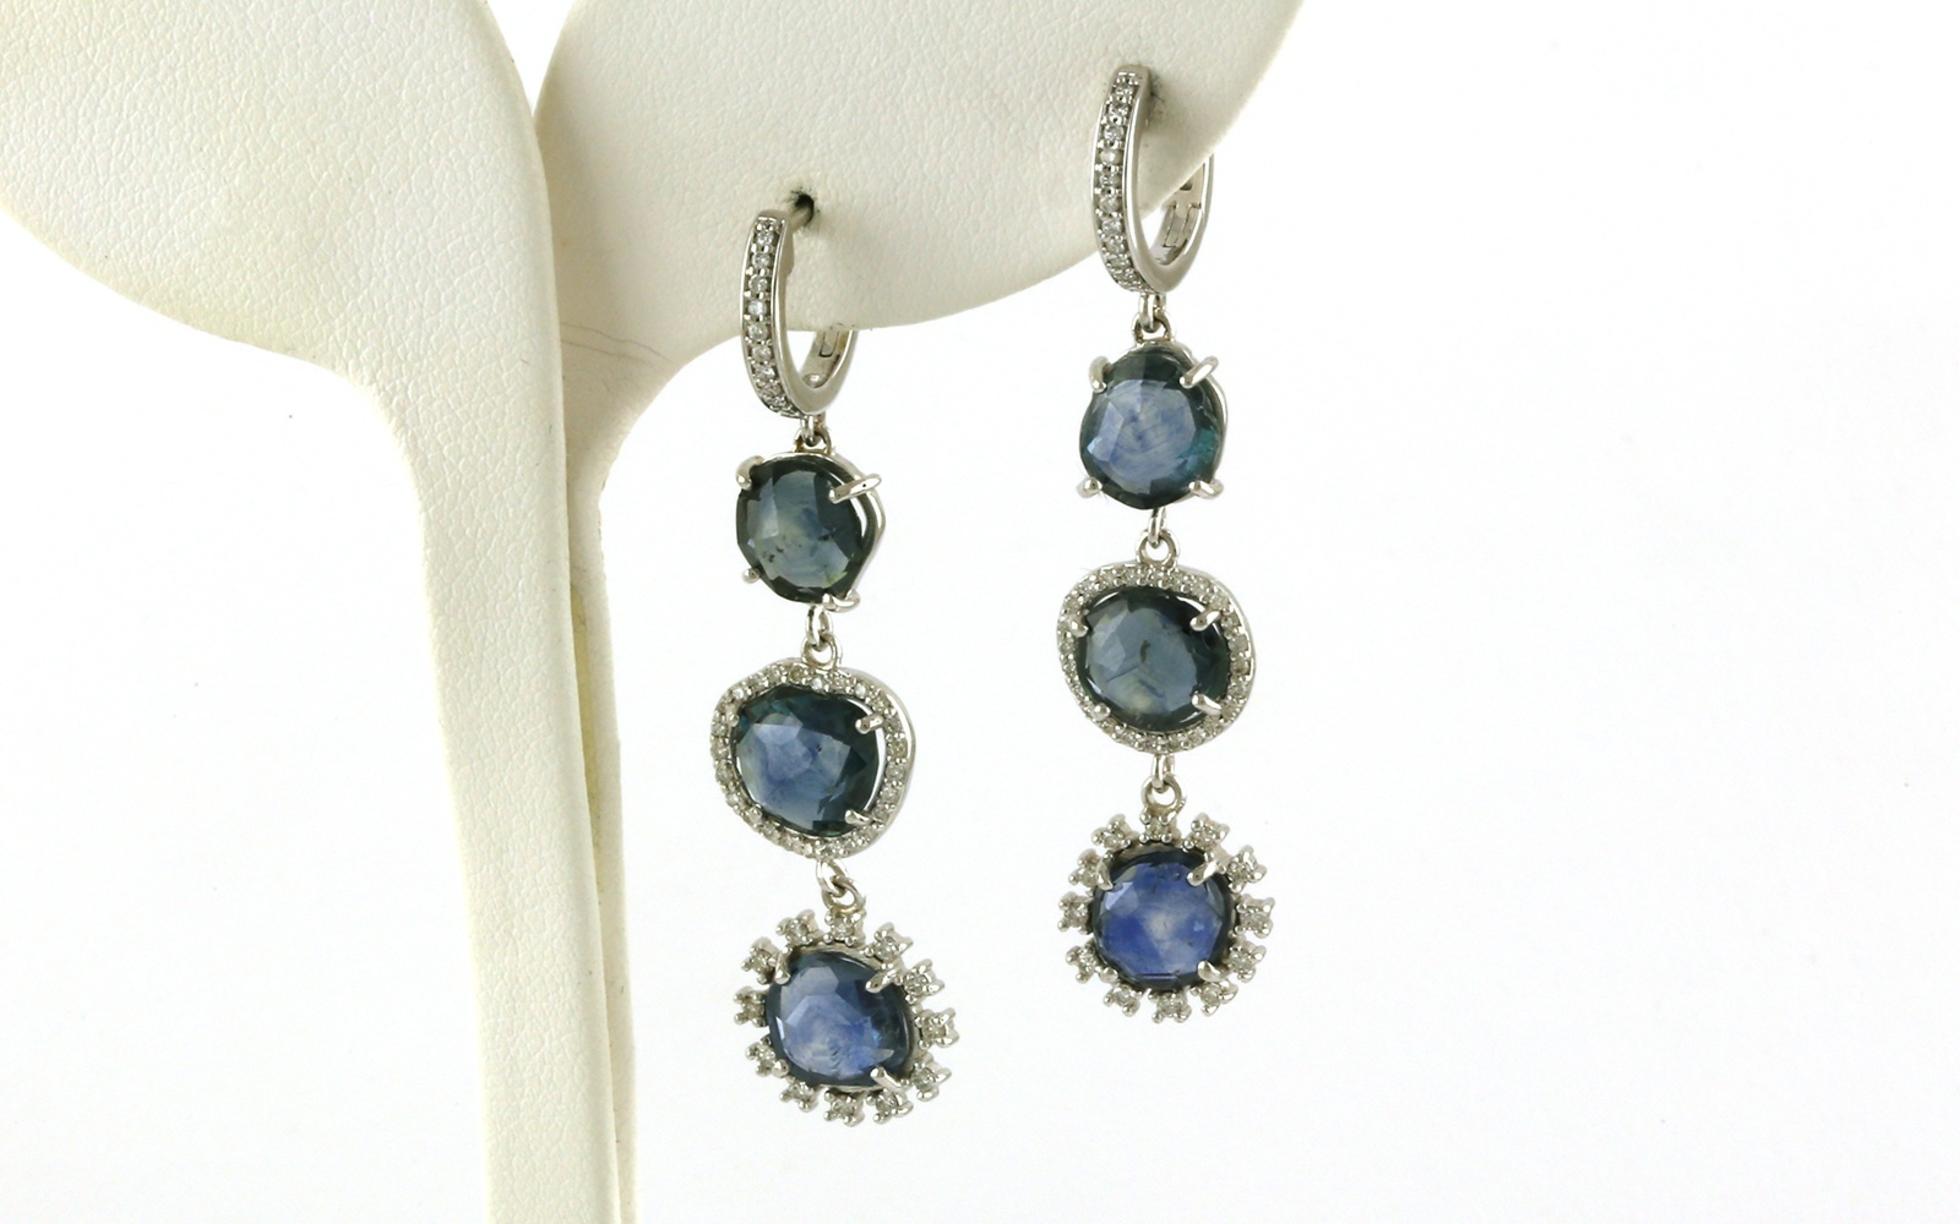 Triple Drop Rose-cut Montana Sapphire and Diamond Dangle Earrings in White Gold (10.26cts TWT)